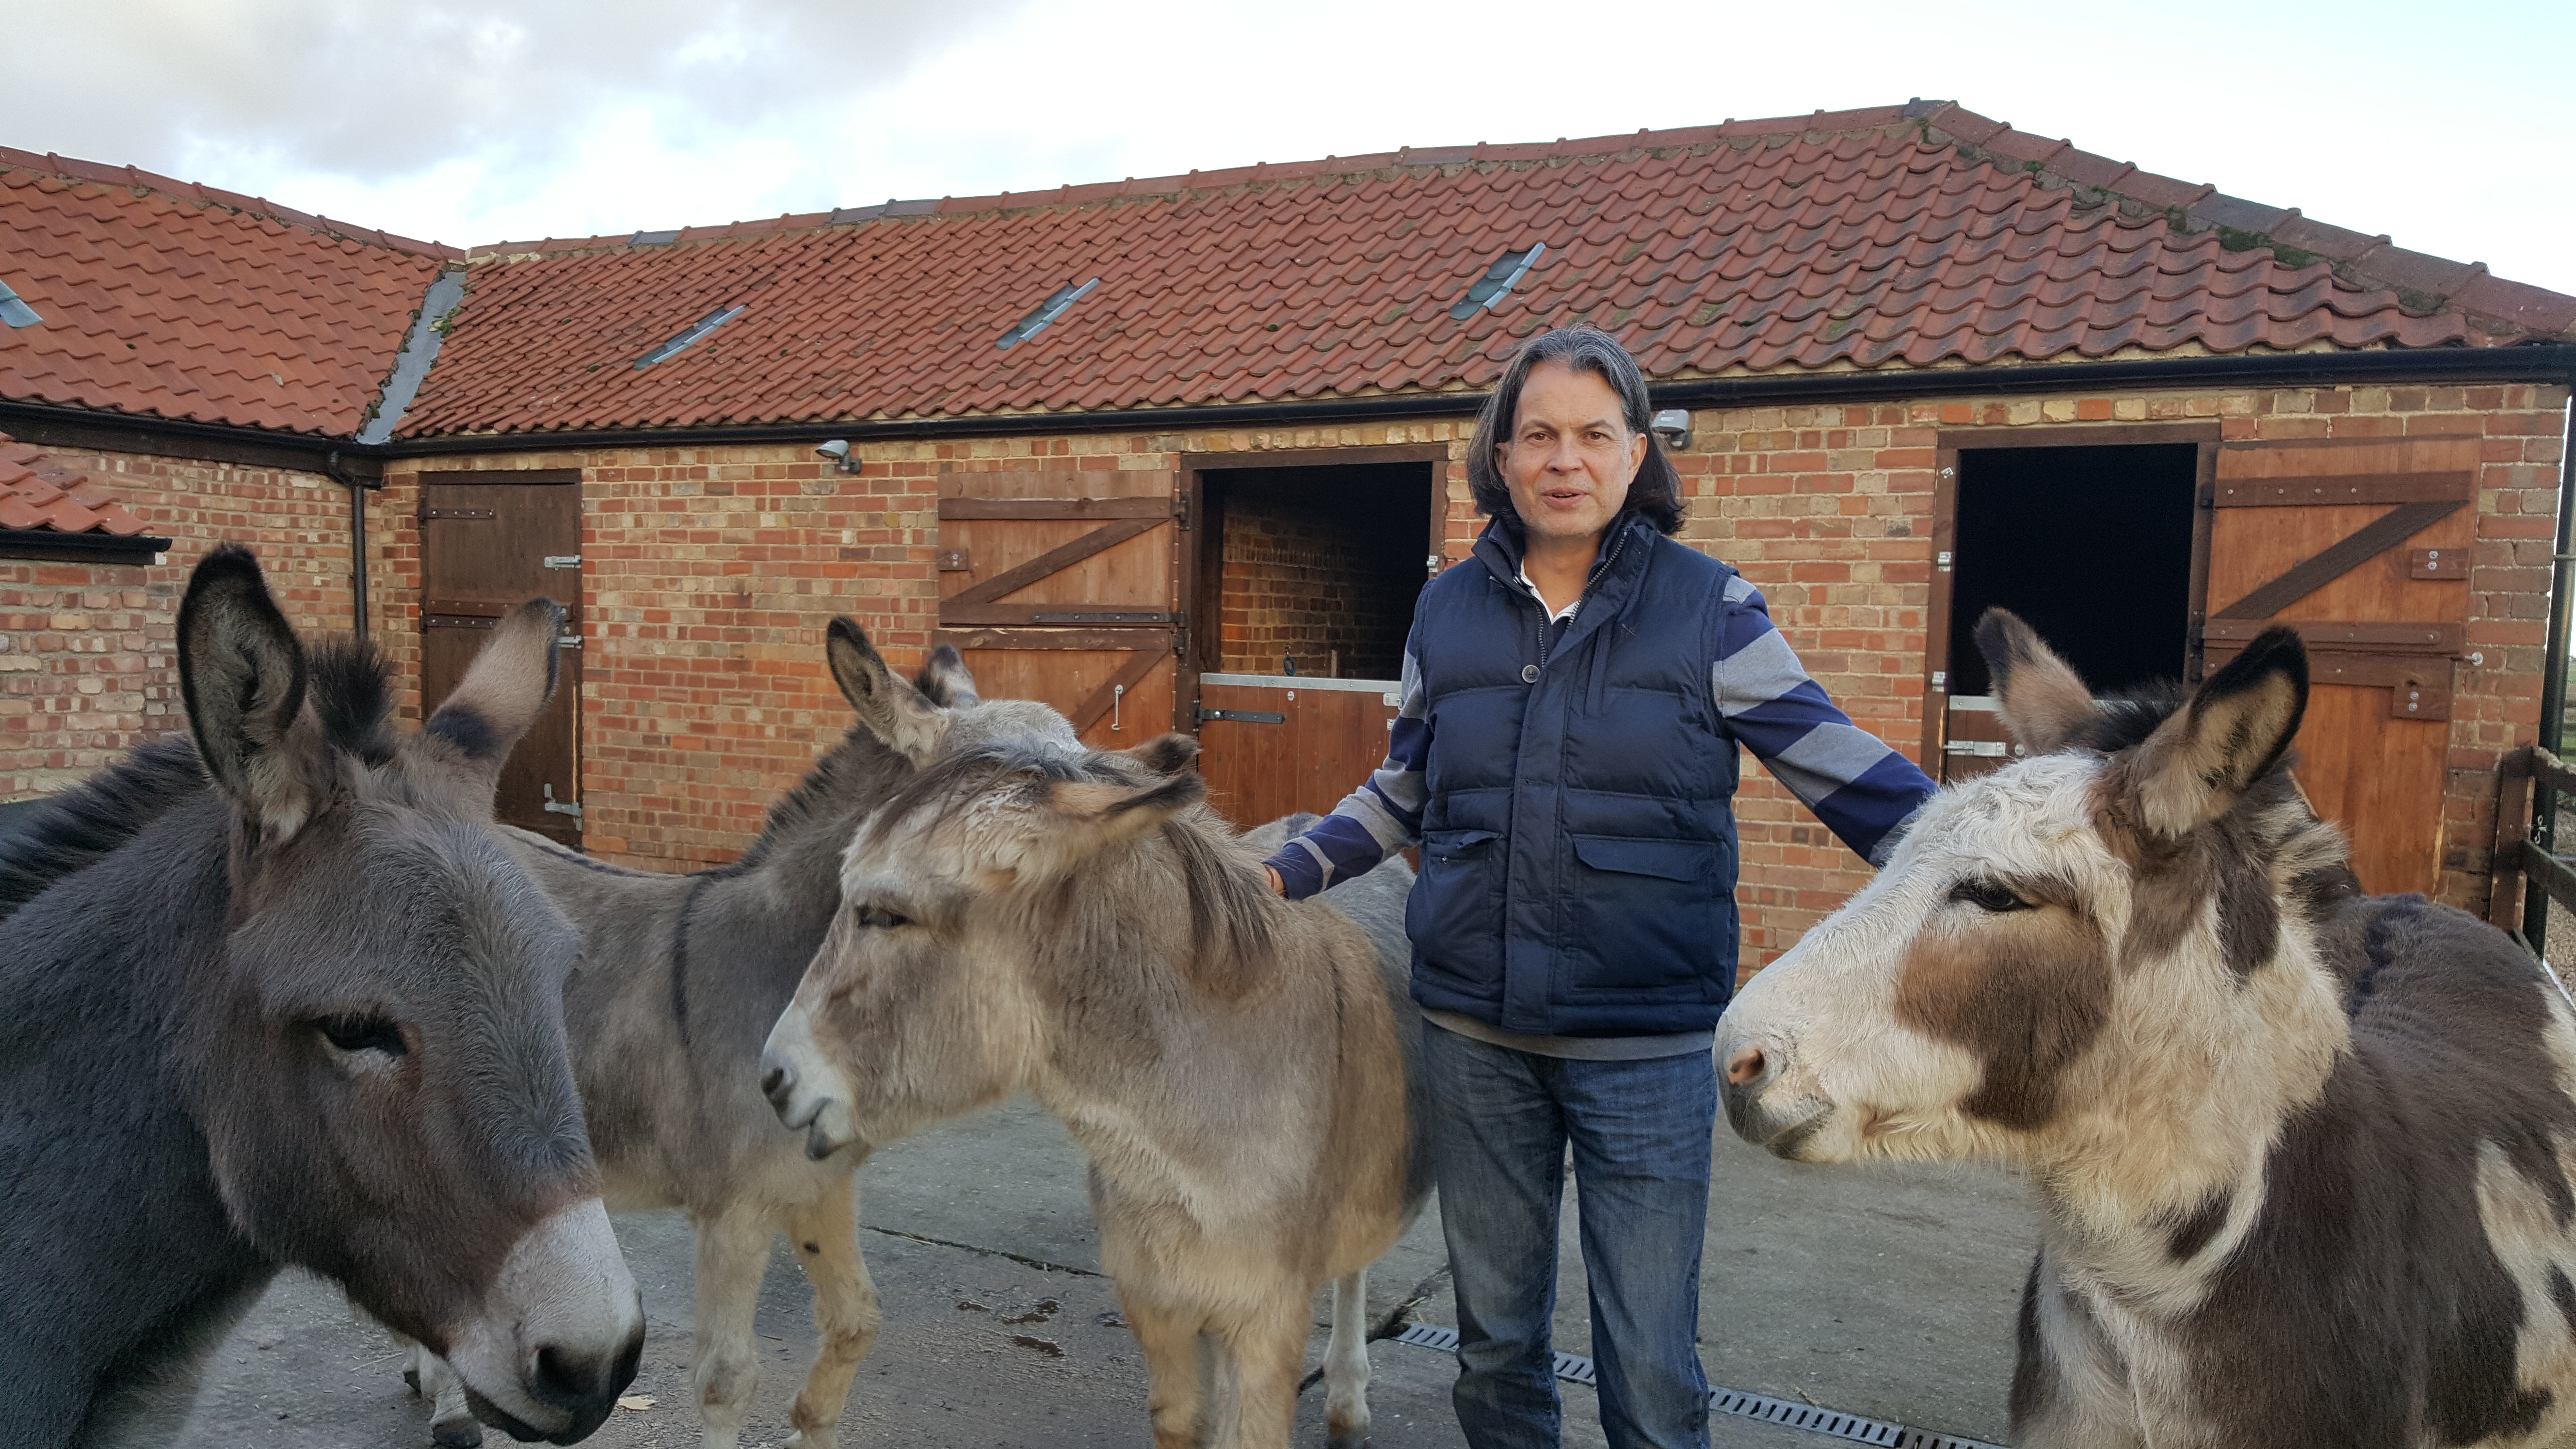 Trustee Chris Martin stood with donkeys in a yard